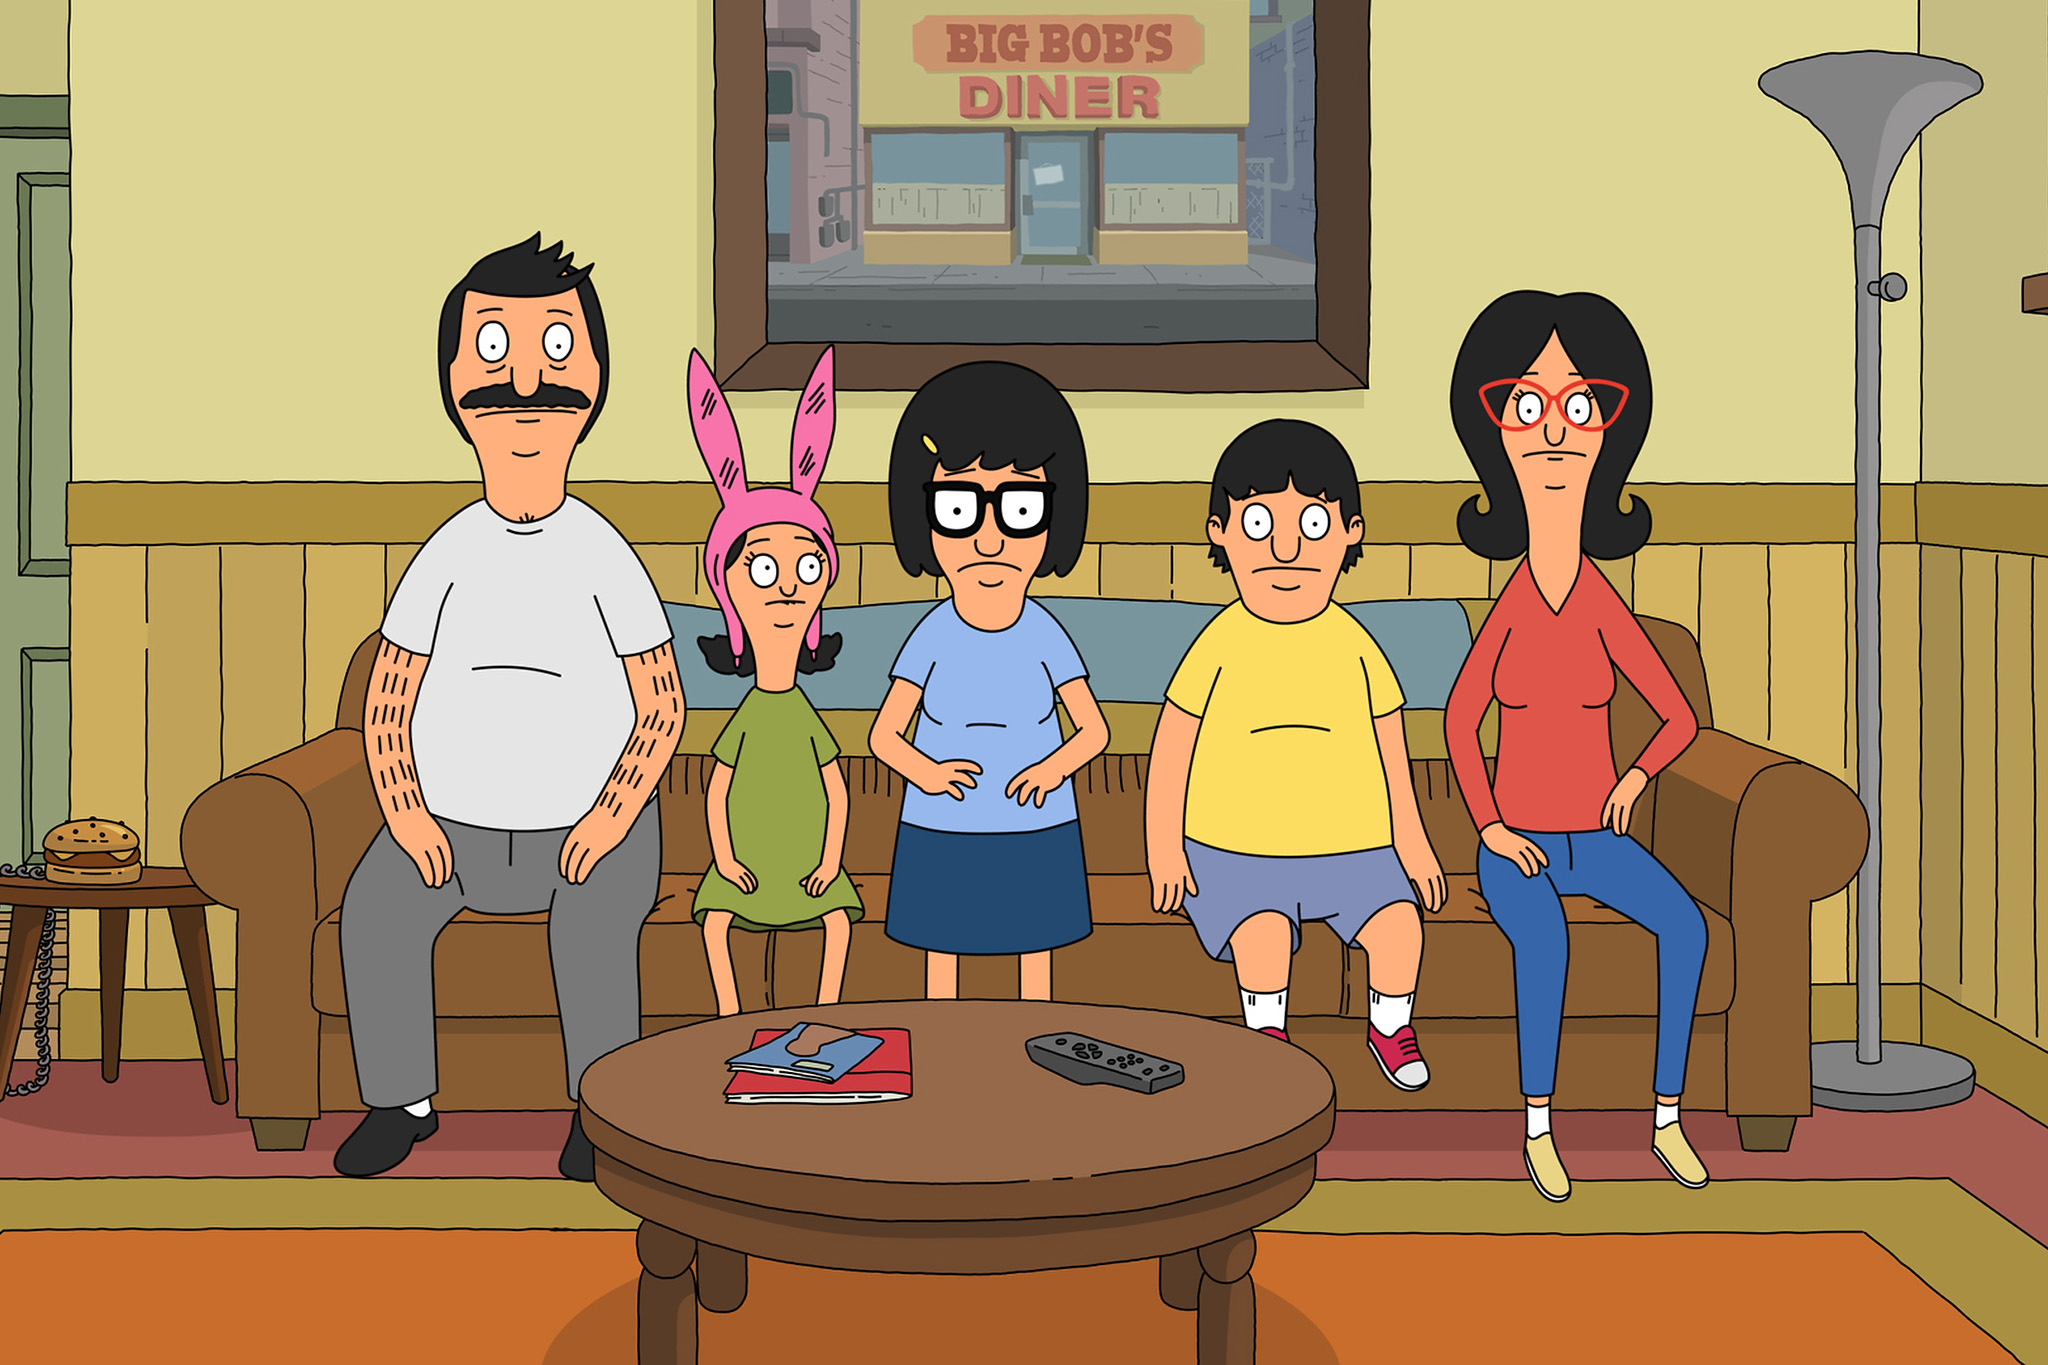 This SF restaurant was the blueprint for ‘Bob’s Burgers’